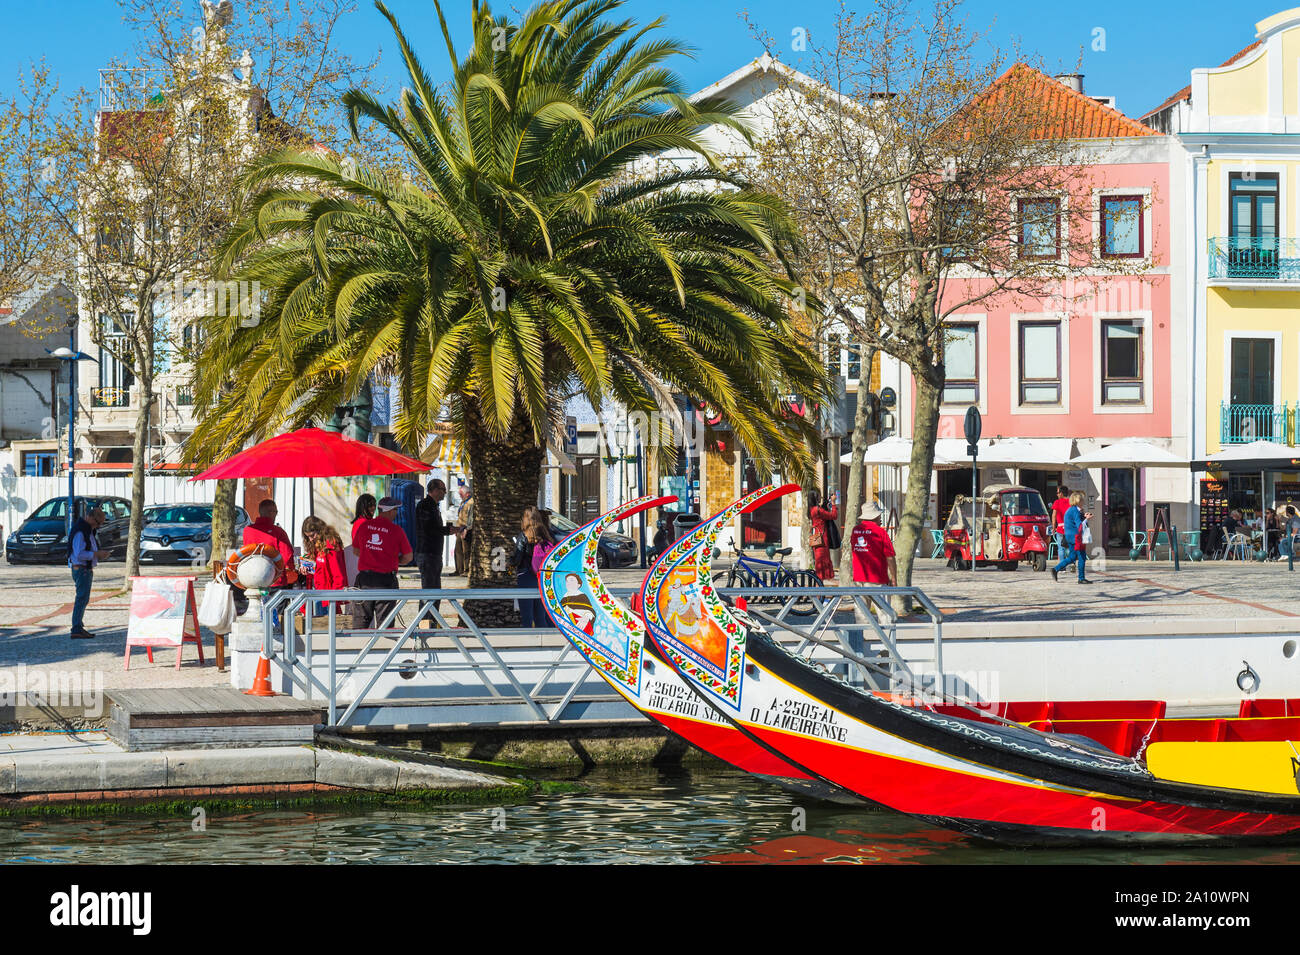 Moliceiros moored along the main canal. Aveiro, Venice of Portugal, Beira Littoral, Portugal Stock Photo